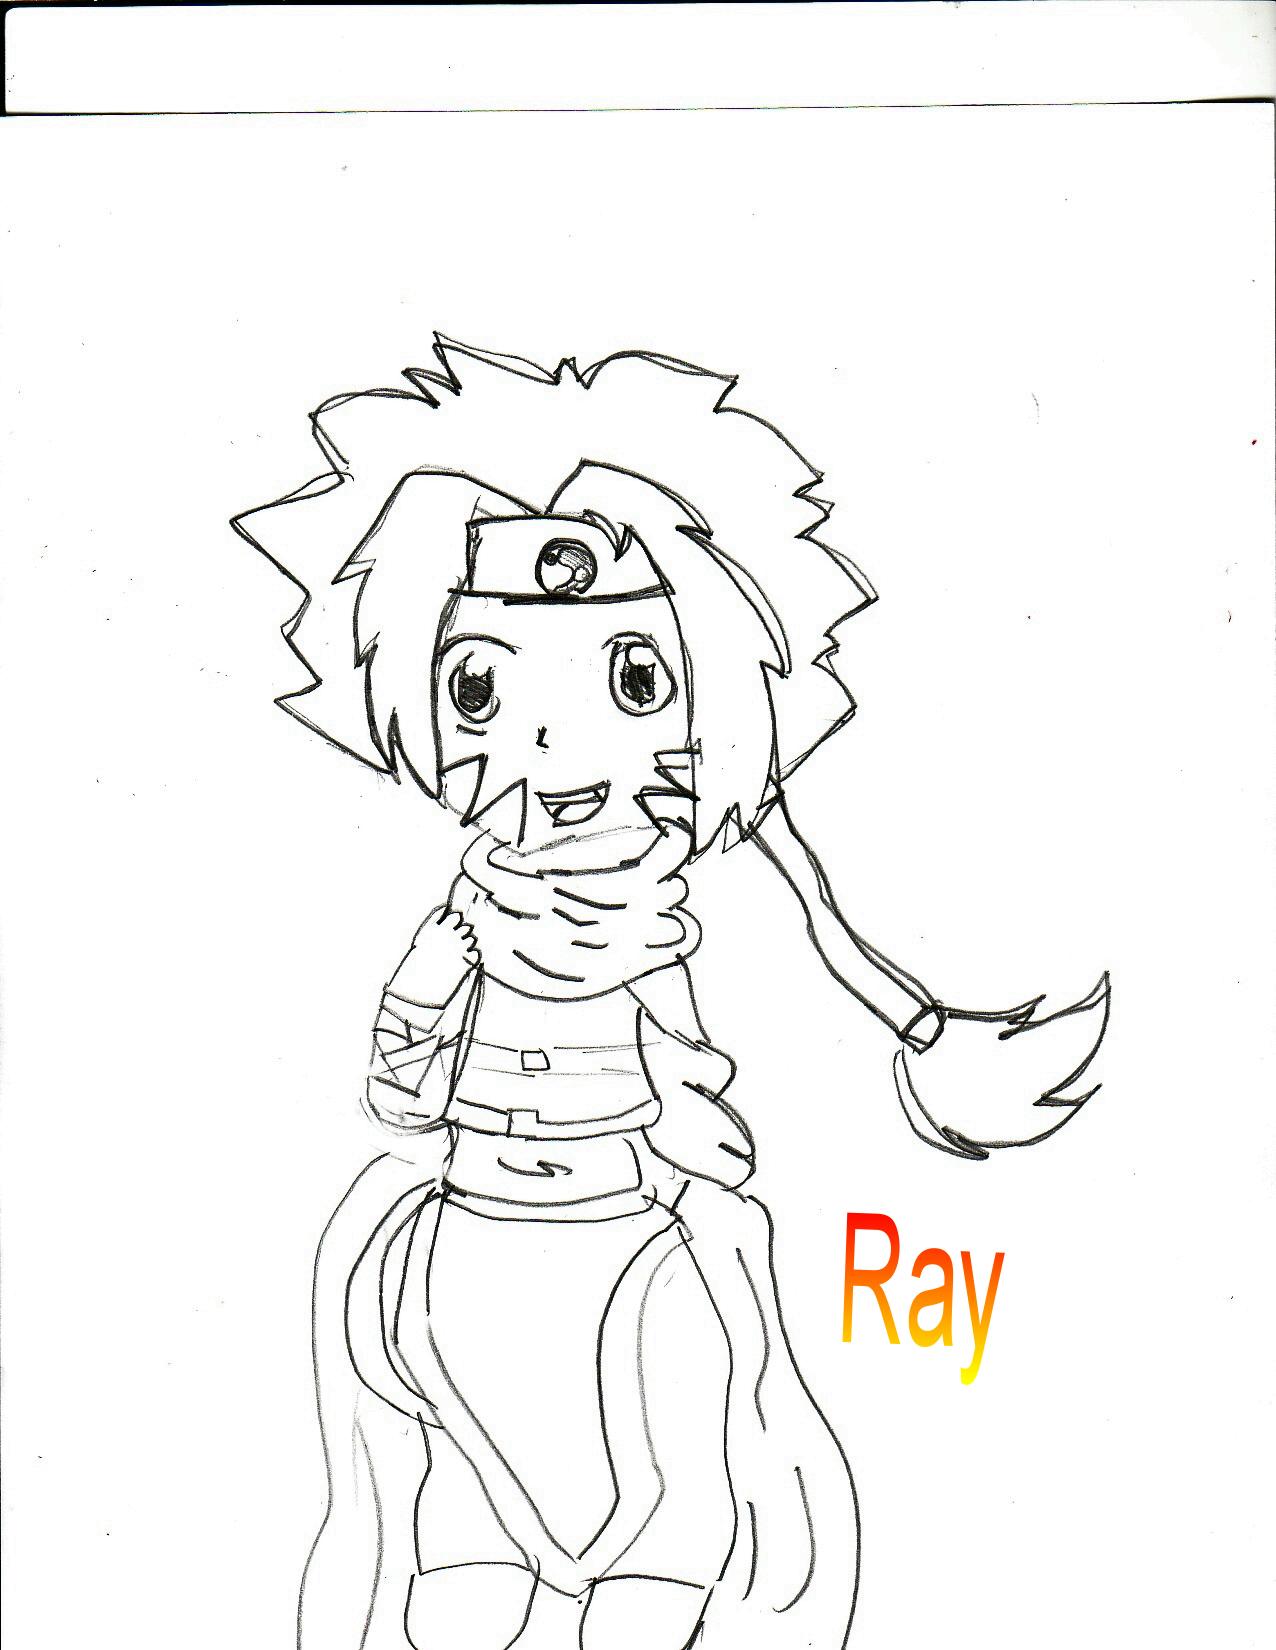 A mixed up Ray by Raylover345678